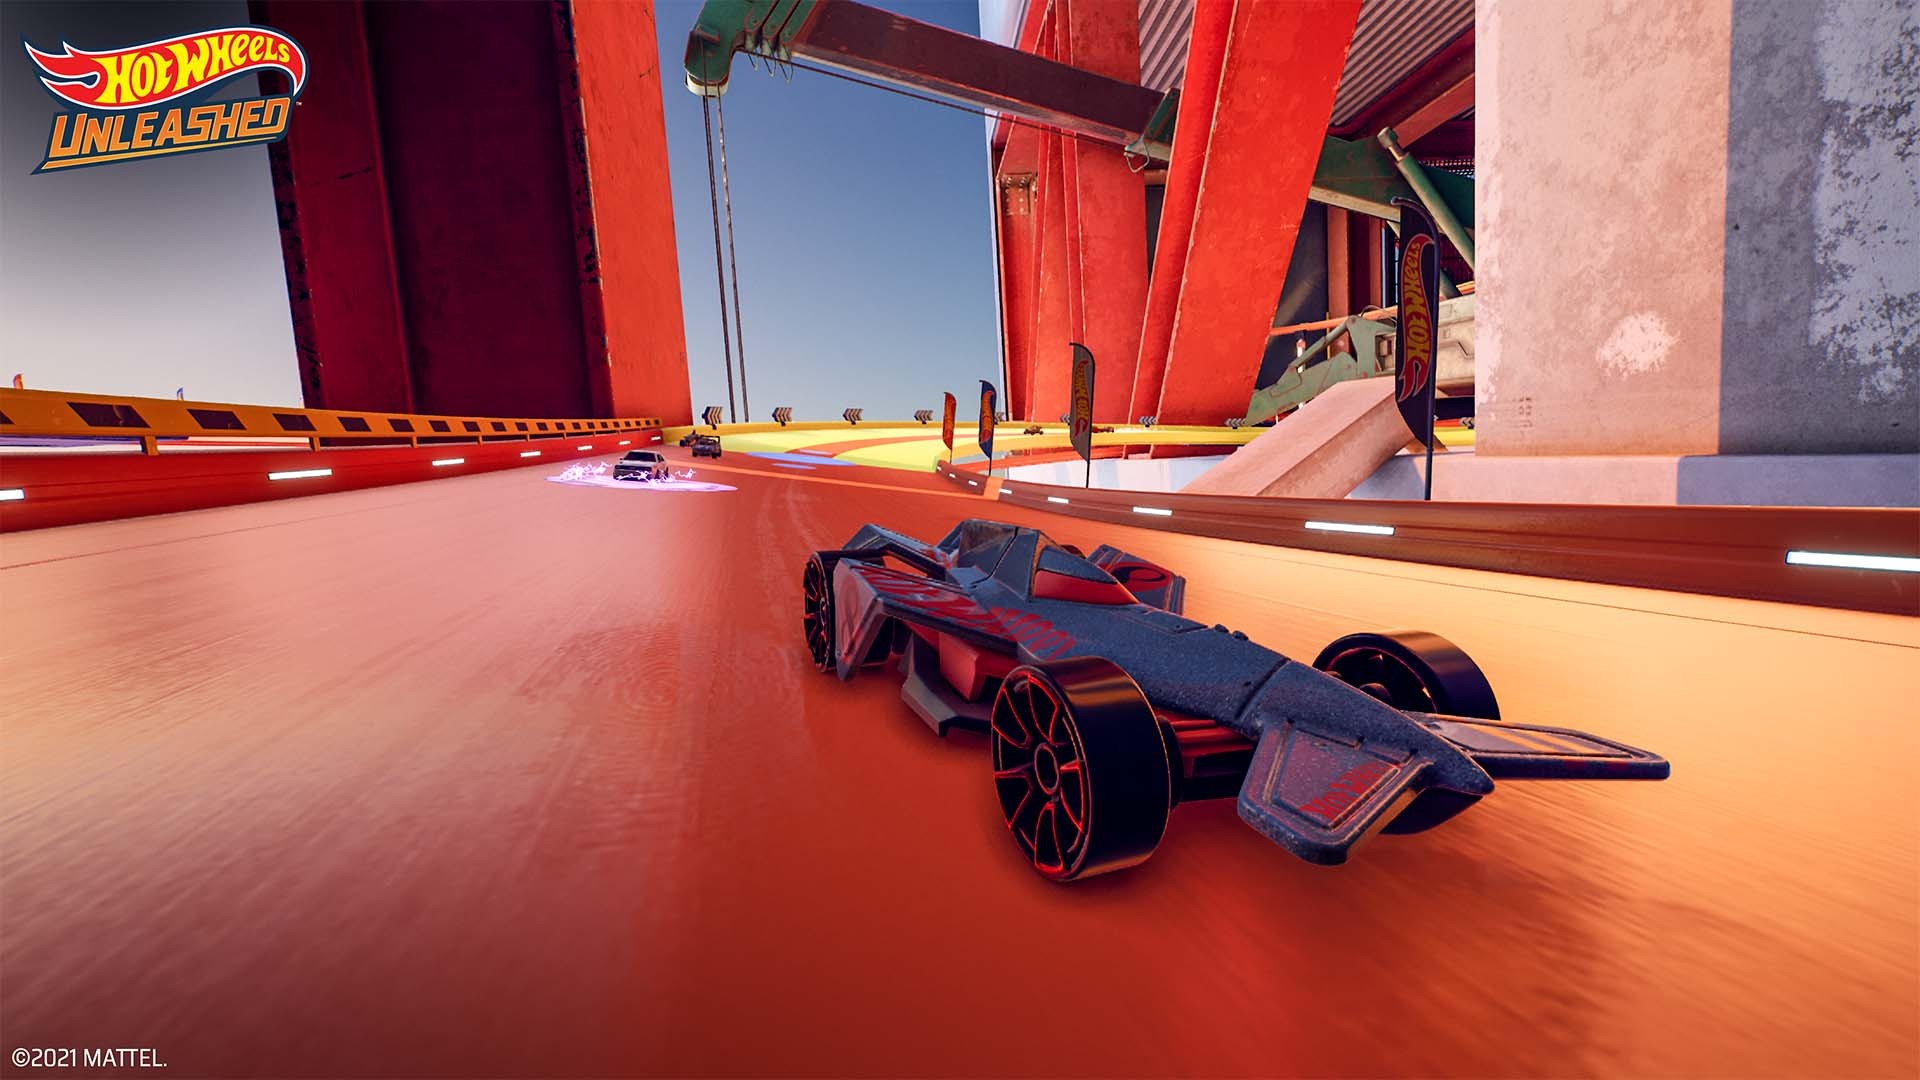 Hot Wheels Unleashed Delivers Pure Racing Fun